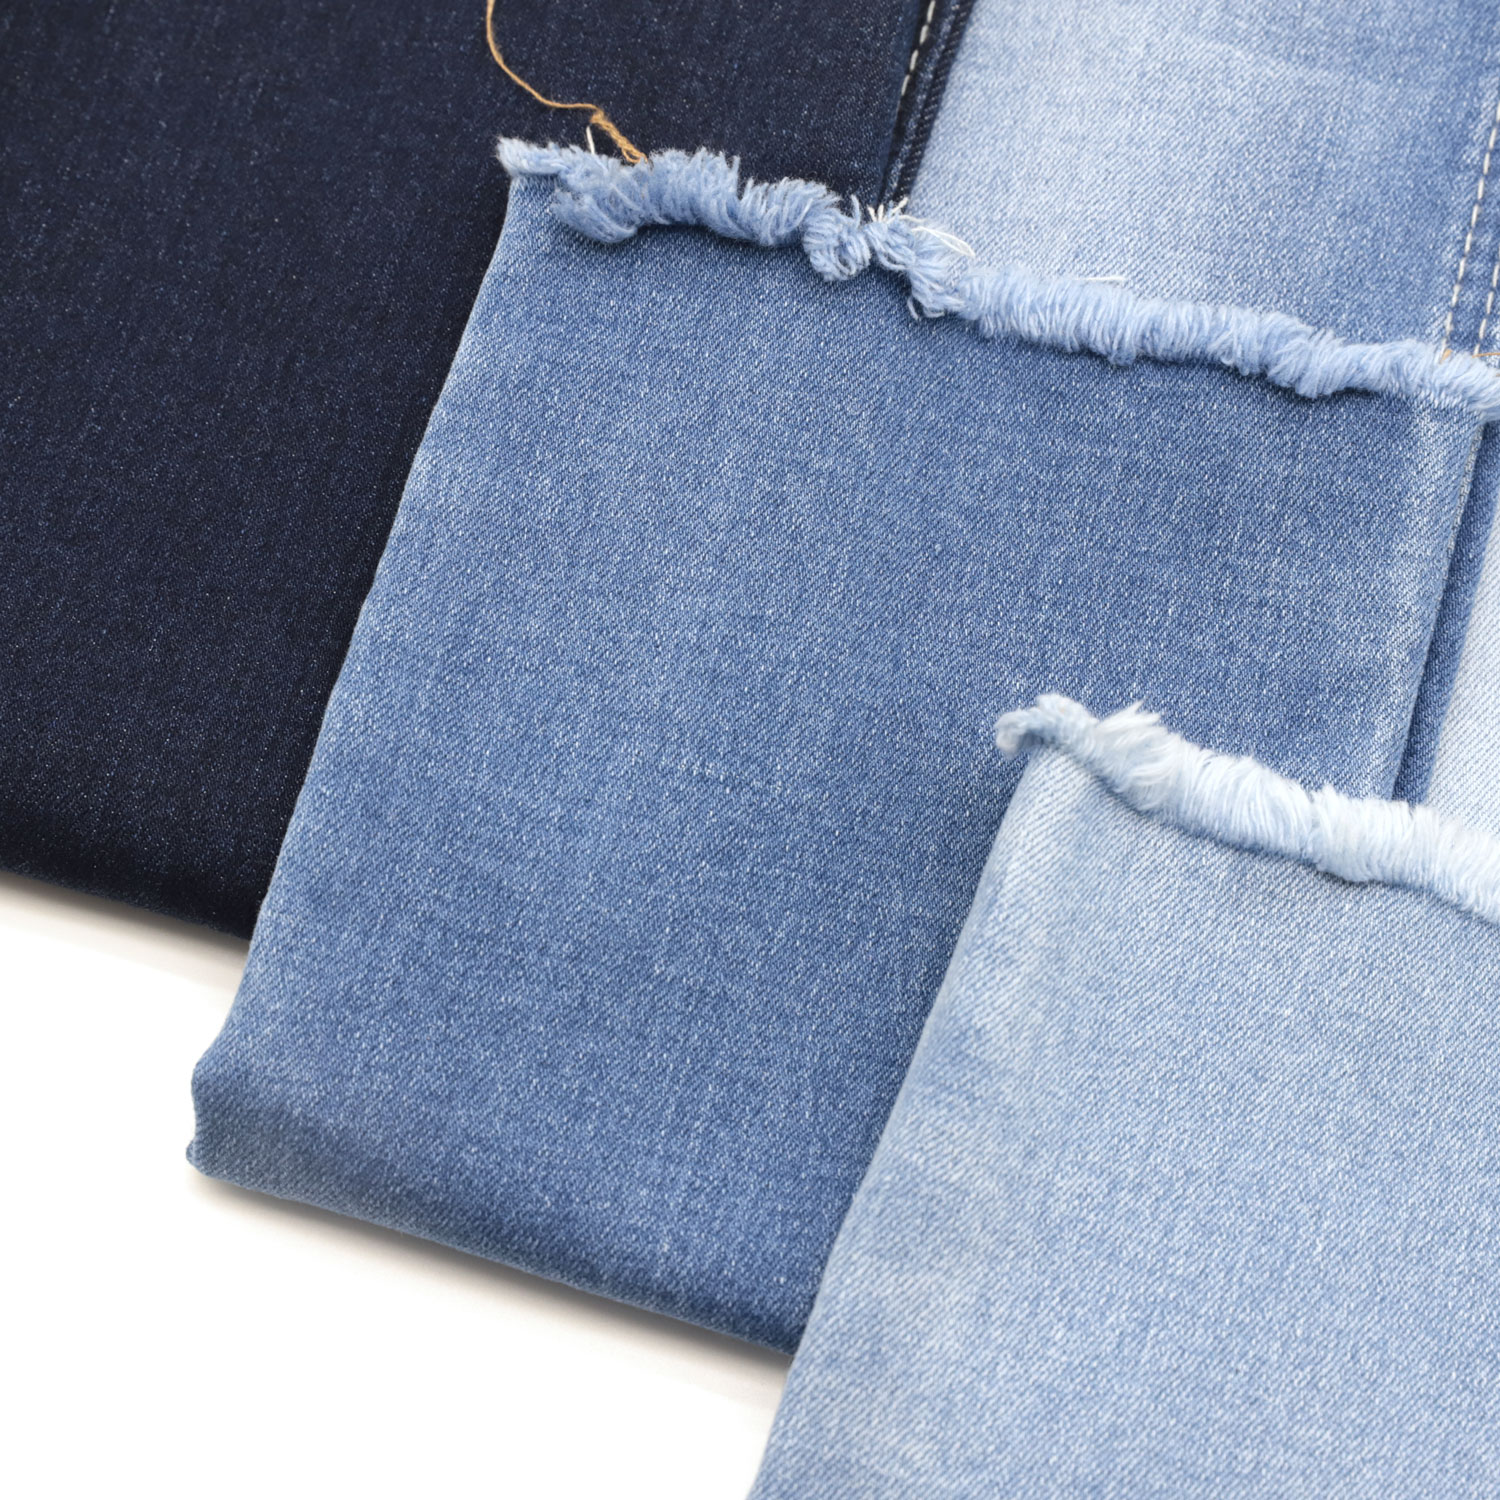 Important Things to Consider Before Buying a Wholesale Jeans Fabric 2